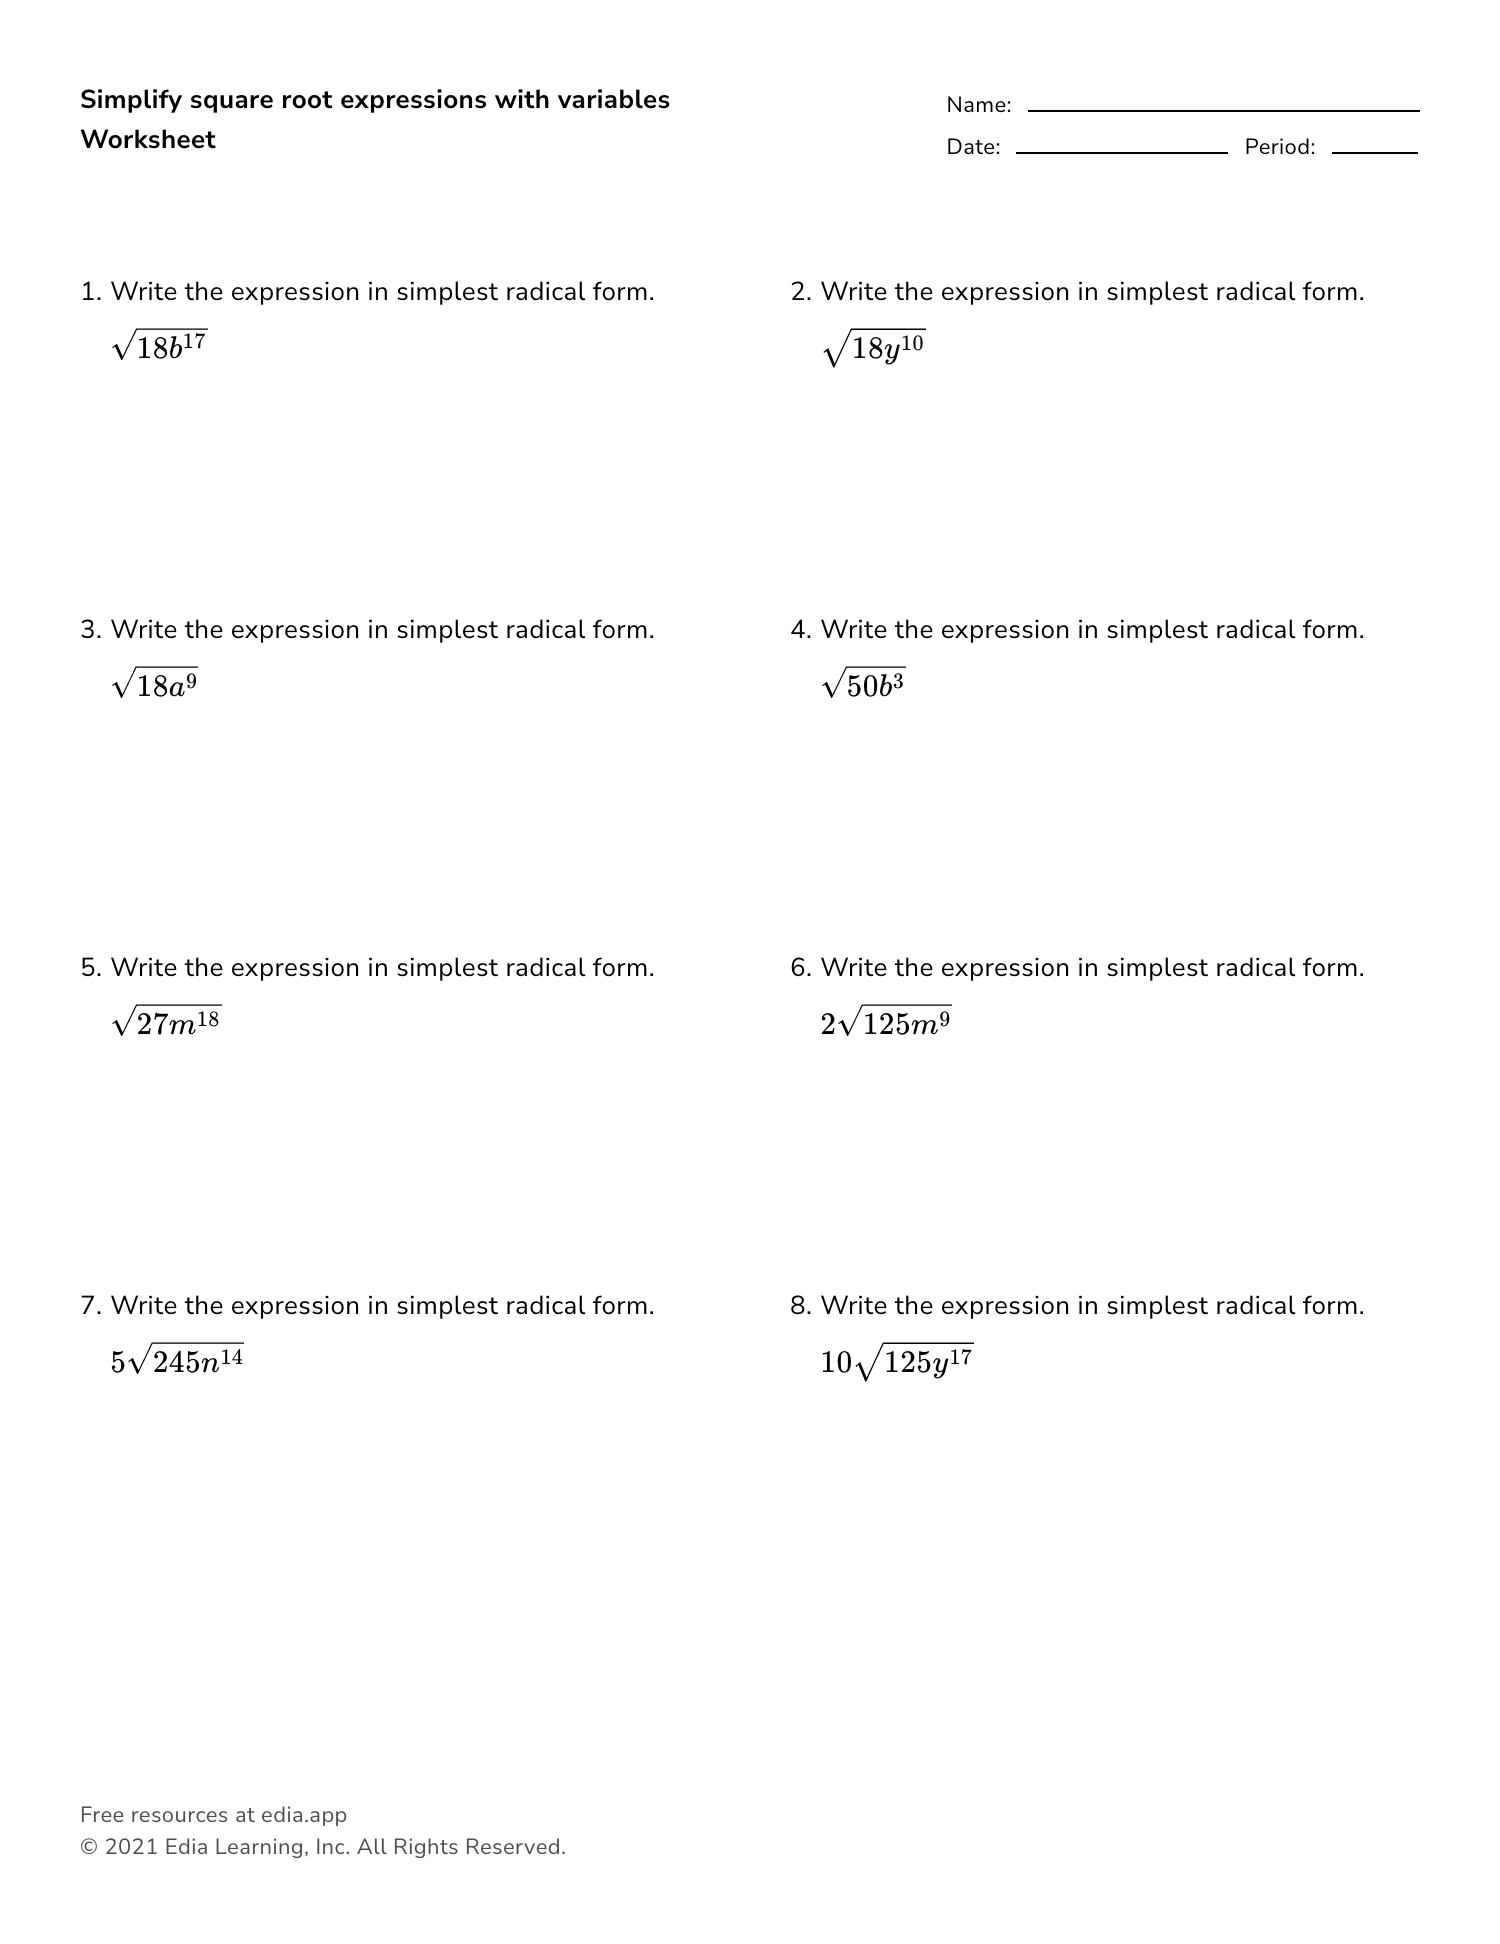 Simplify Square Root Expressions With Variables - Worksheet With Regard To Simplifying Radicals With Variables Worksheet